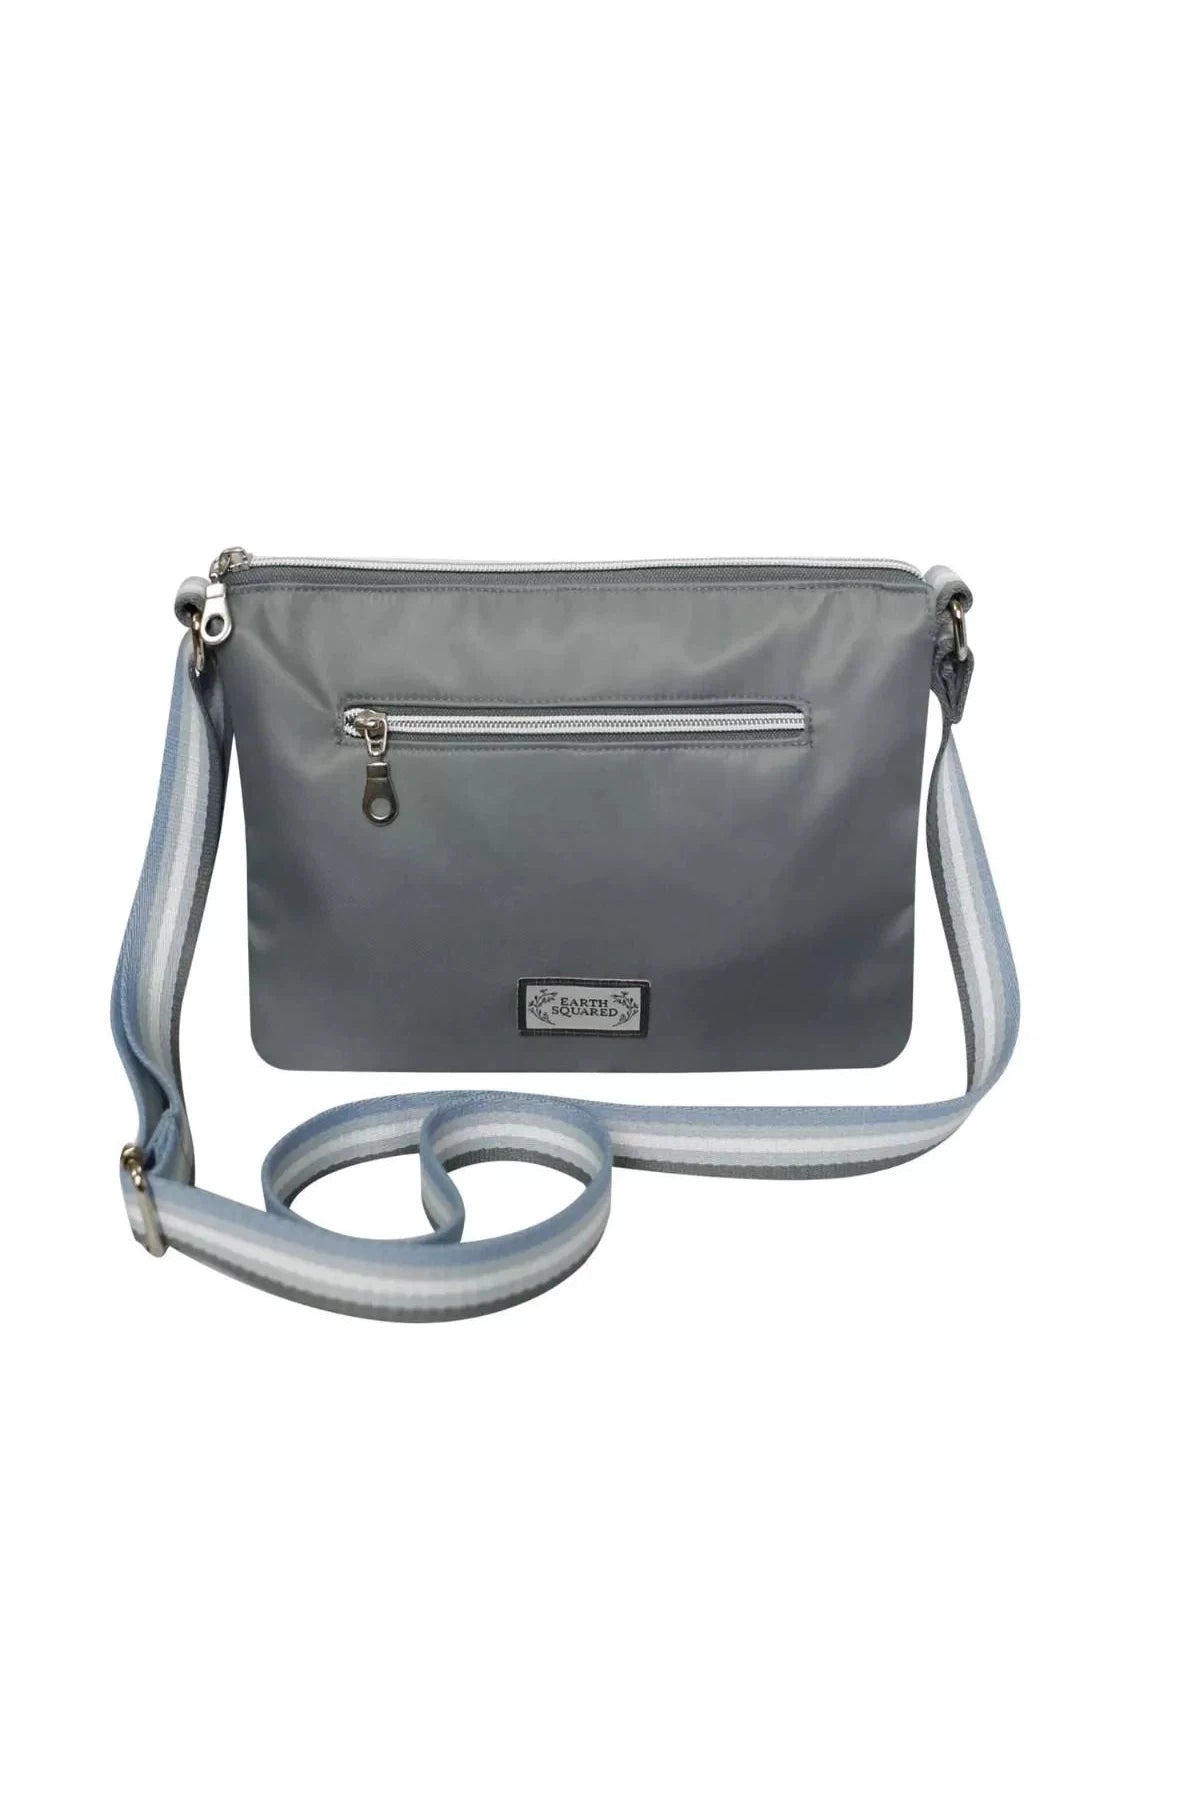 Earth Squared Recycled Voyage Messenger Ultimate Grey Bag-Womens-Ohh! By Gum - Shop Sustainable